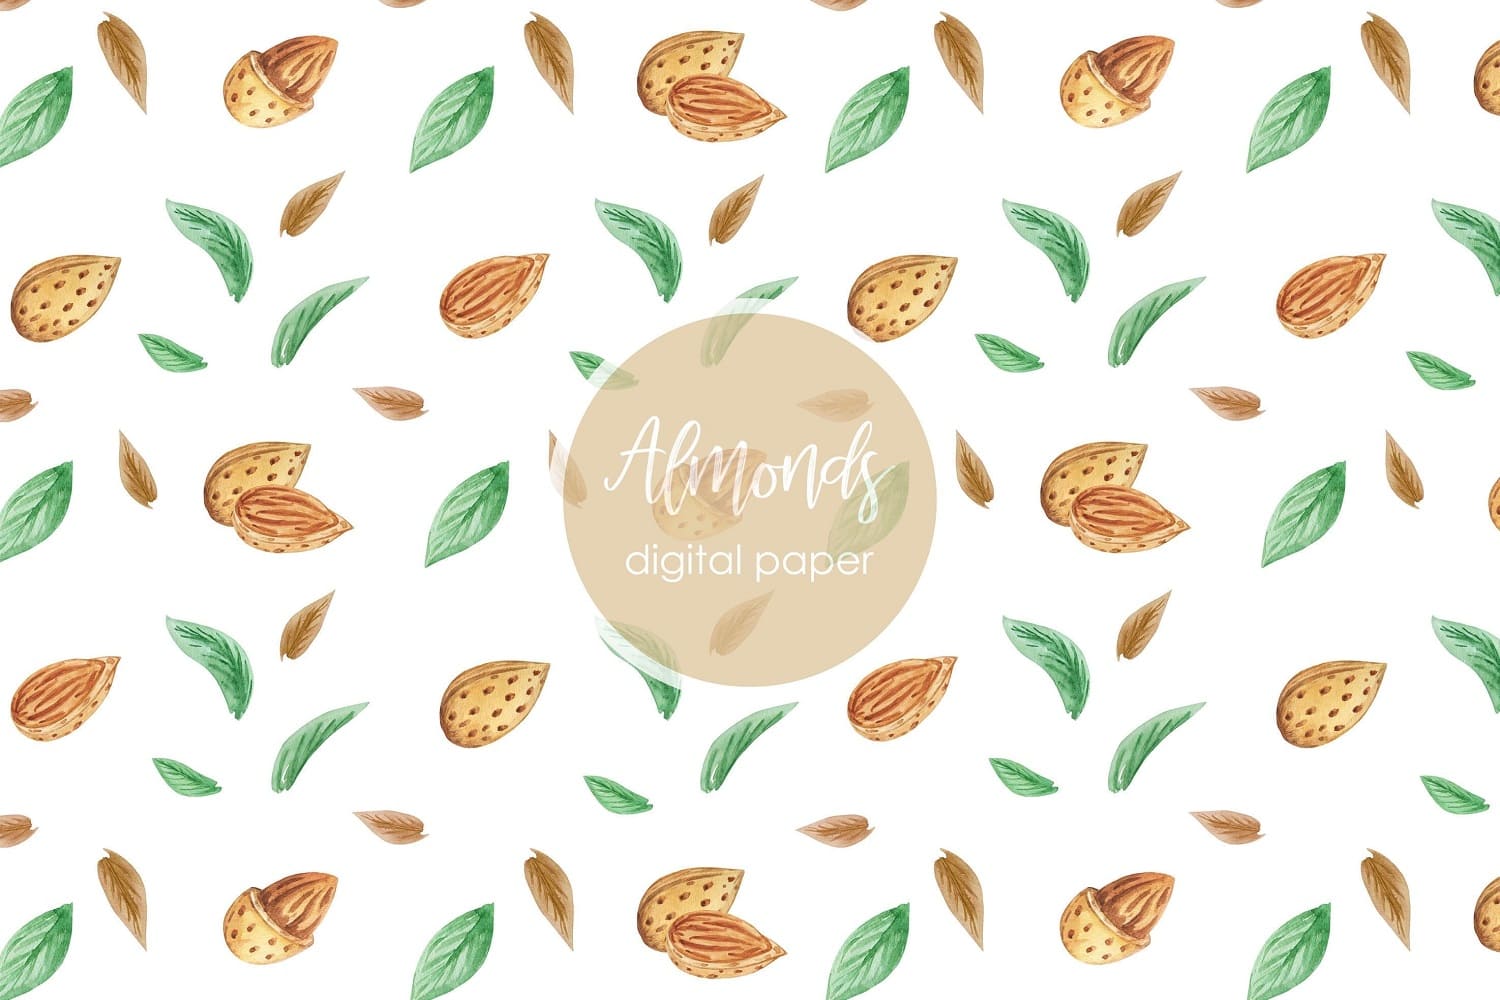 White background with almonds and green leaves, round light brown logo in the center.